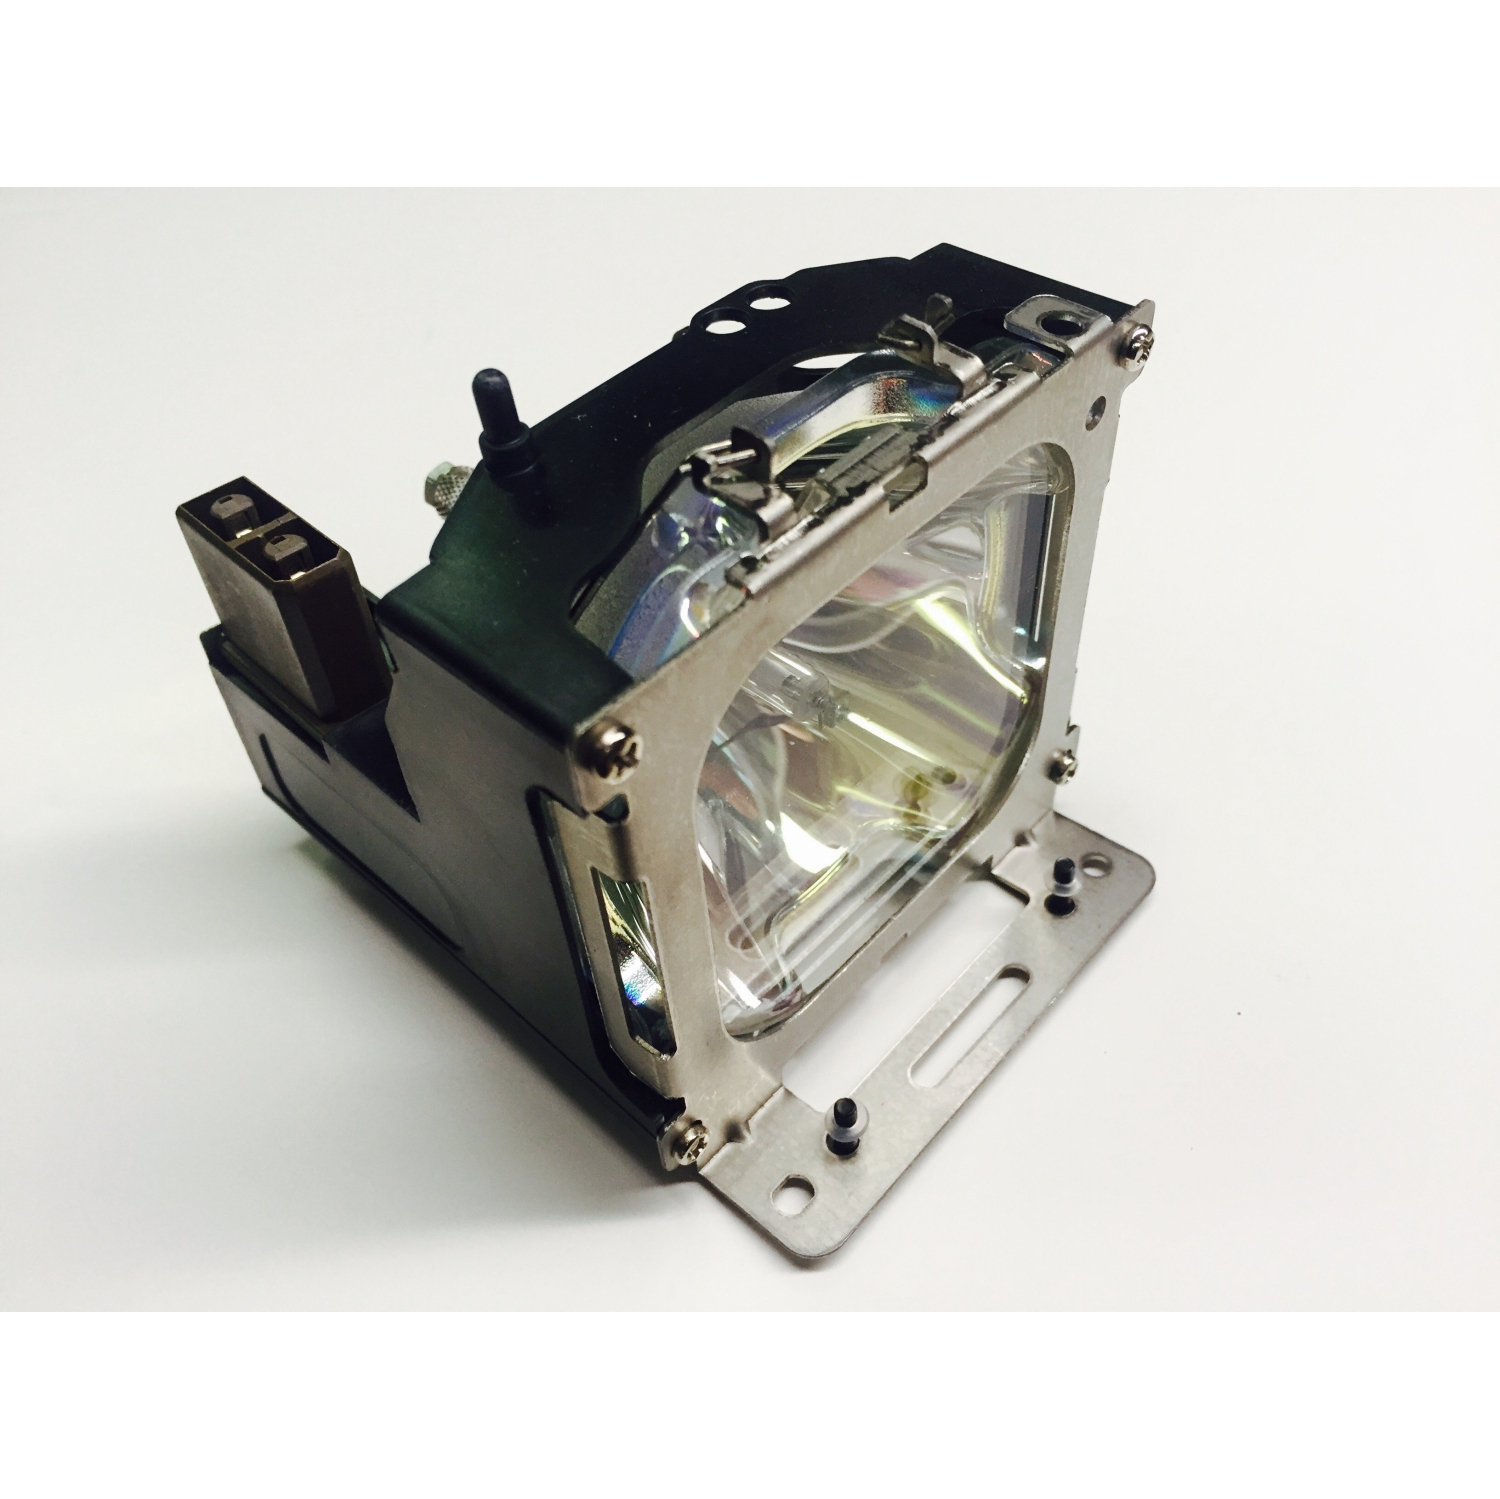 CP-985 Replacement Lamp and Housing with Original Bulb Inside